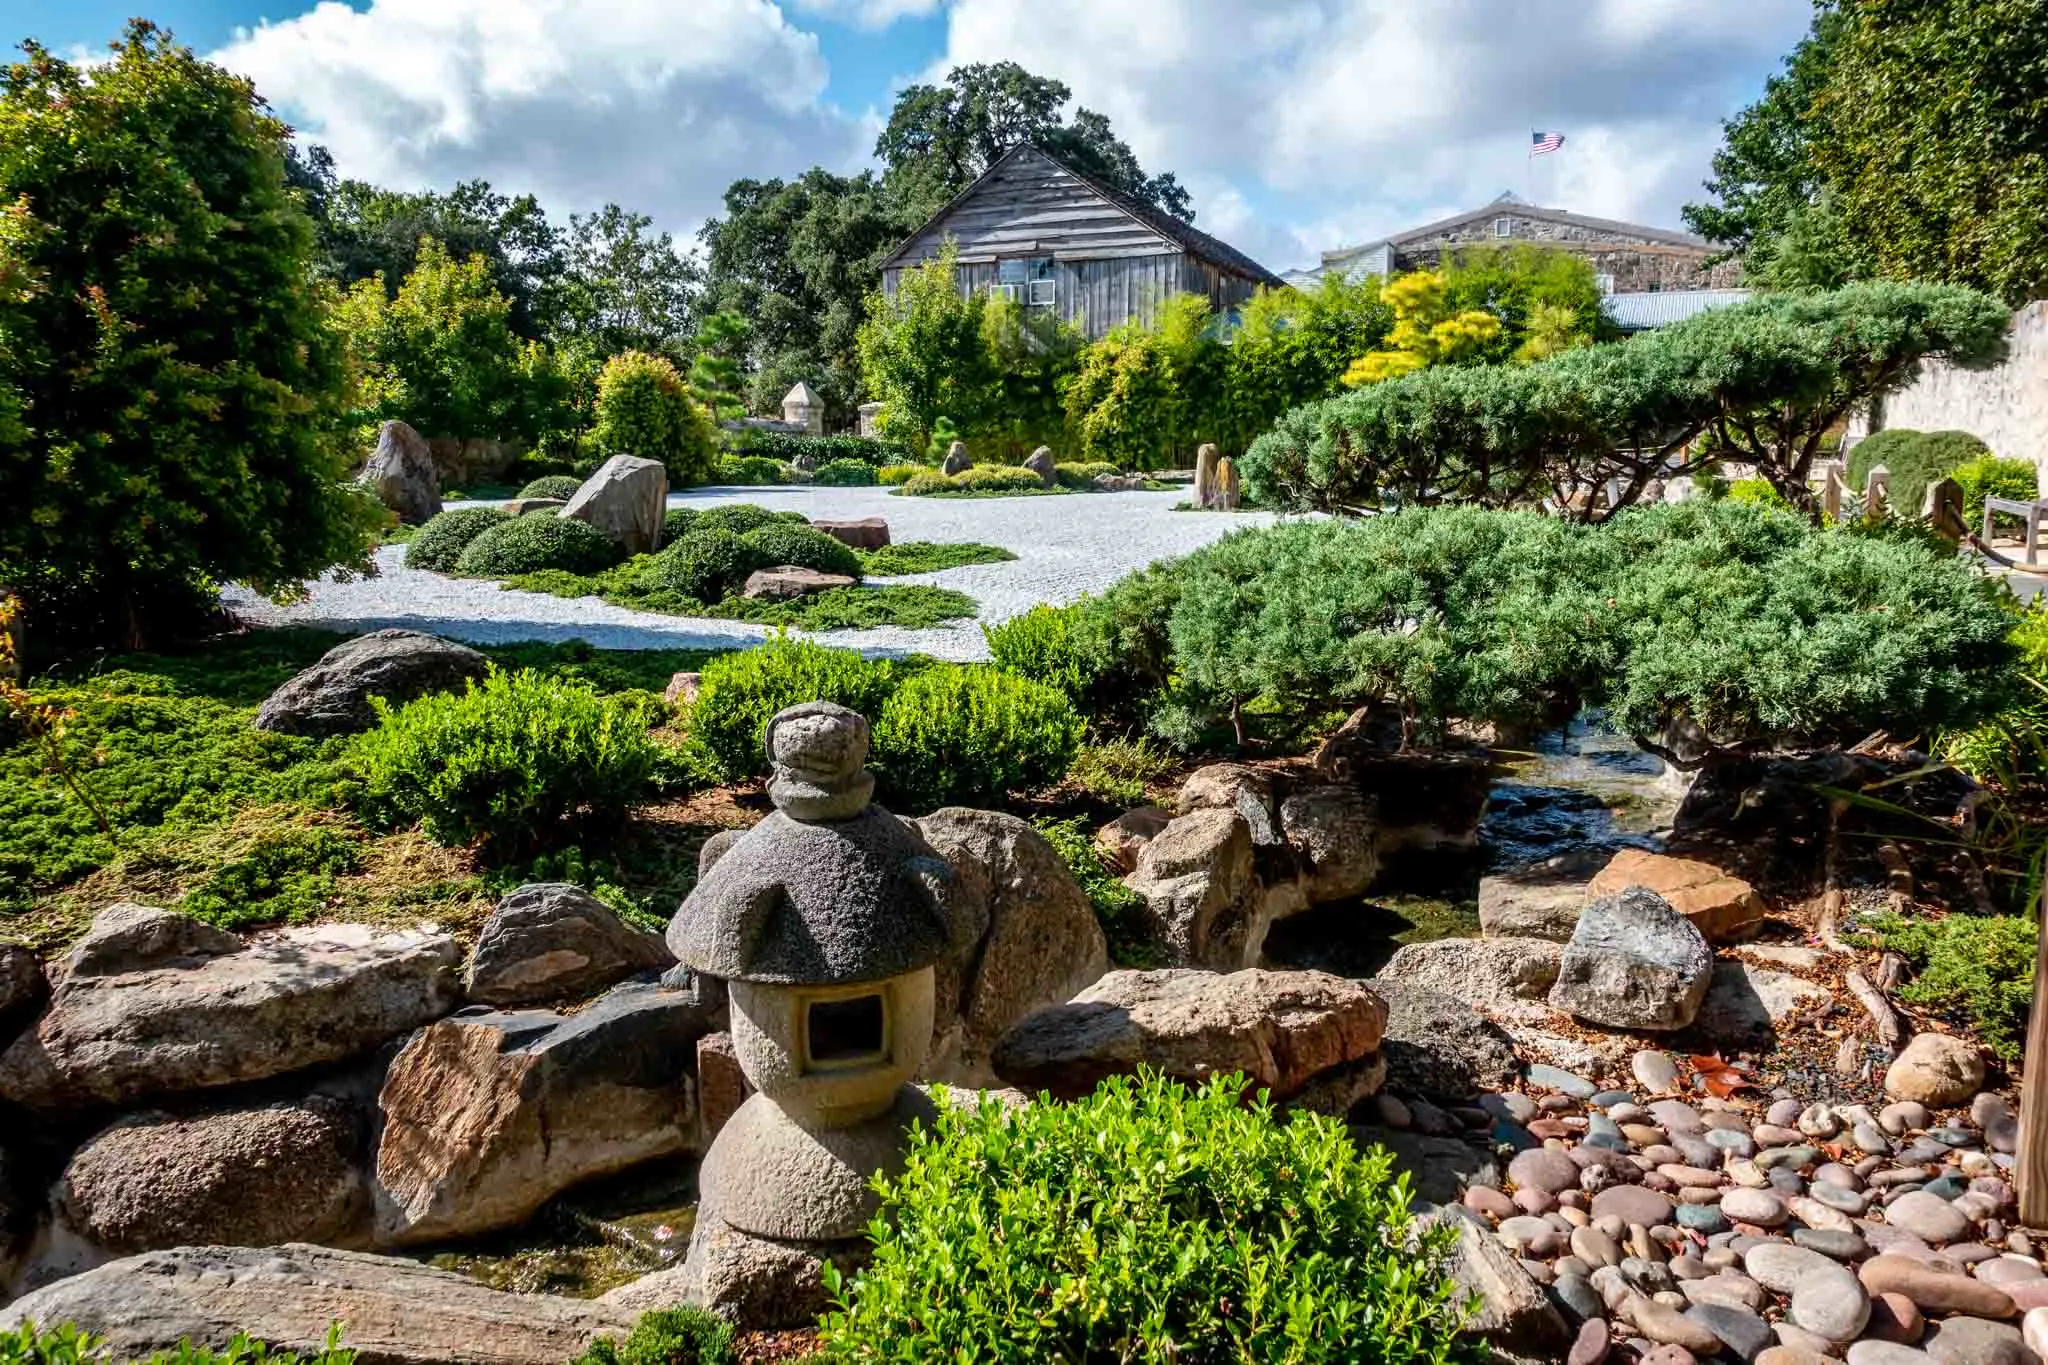 Plants, rocks, and decorations in a Japanese-style garden. 